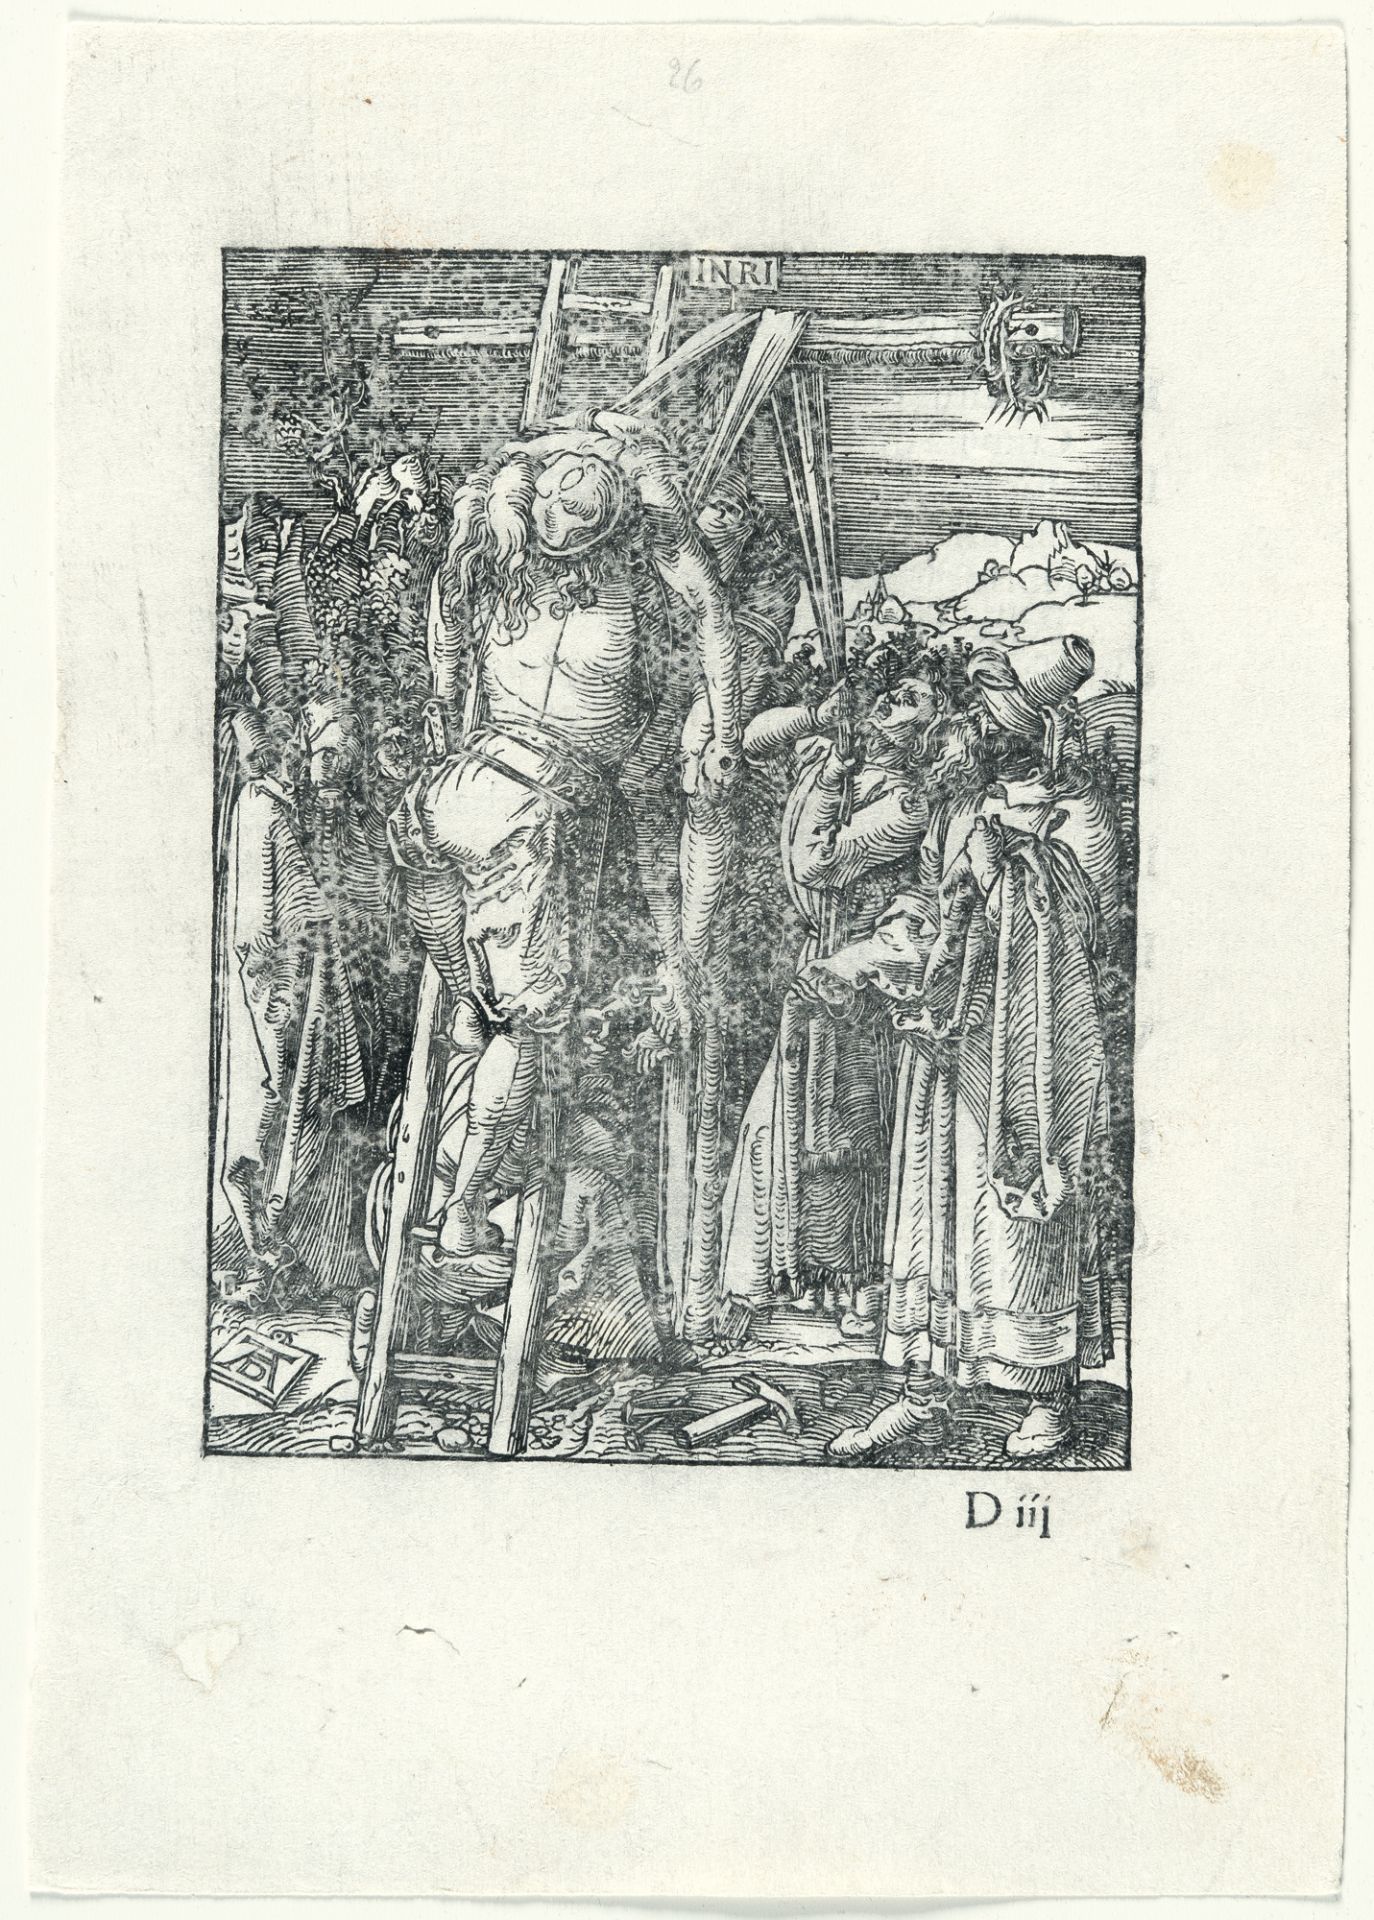 Albrecht Dürer (1471 - Nürnberg - 1528) – The Descent from the Cross (From "The Small Passion") - Image 2 of 3